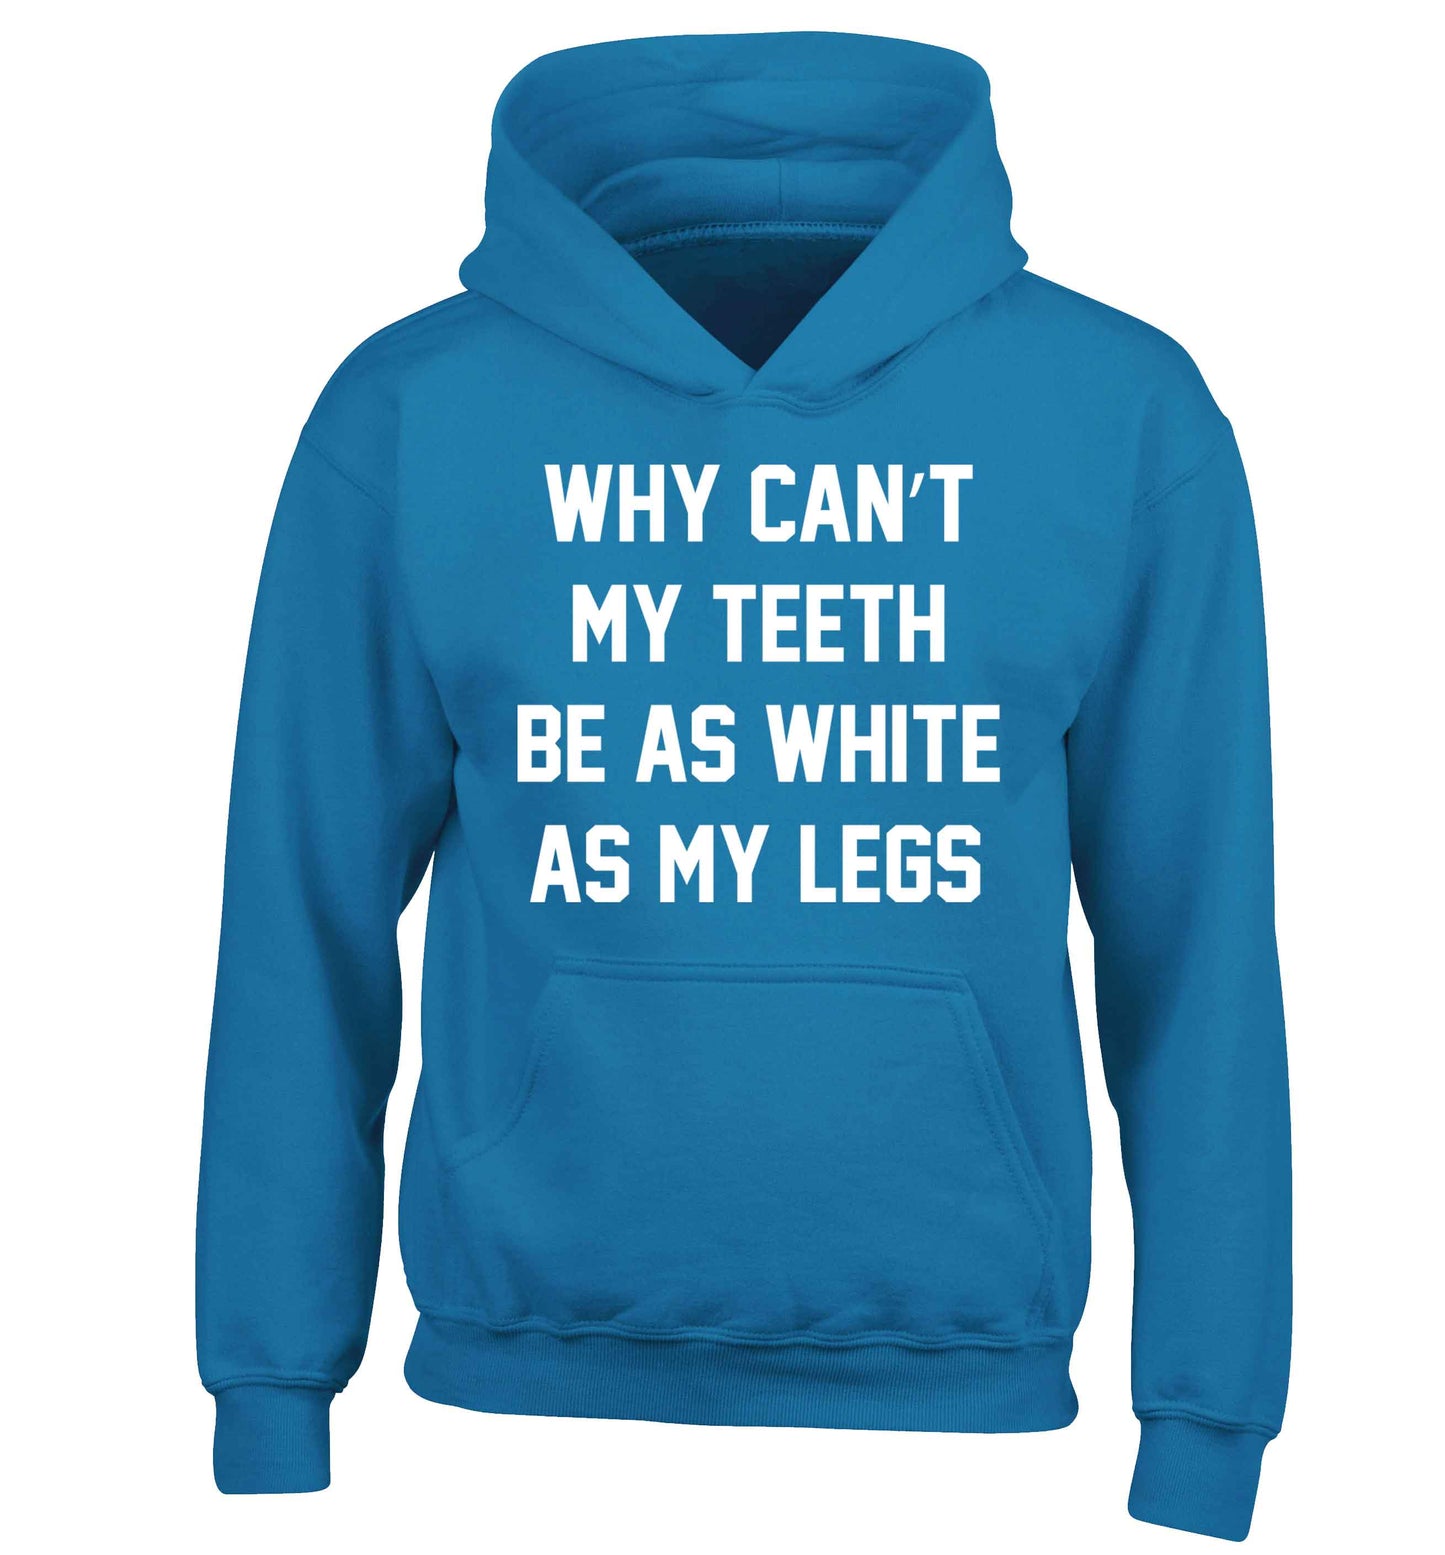 Why can't my teeth be as white as my legs children's blue hoodie 12-13 Years